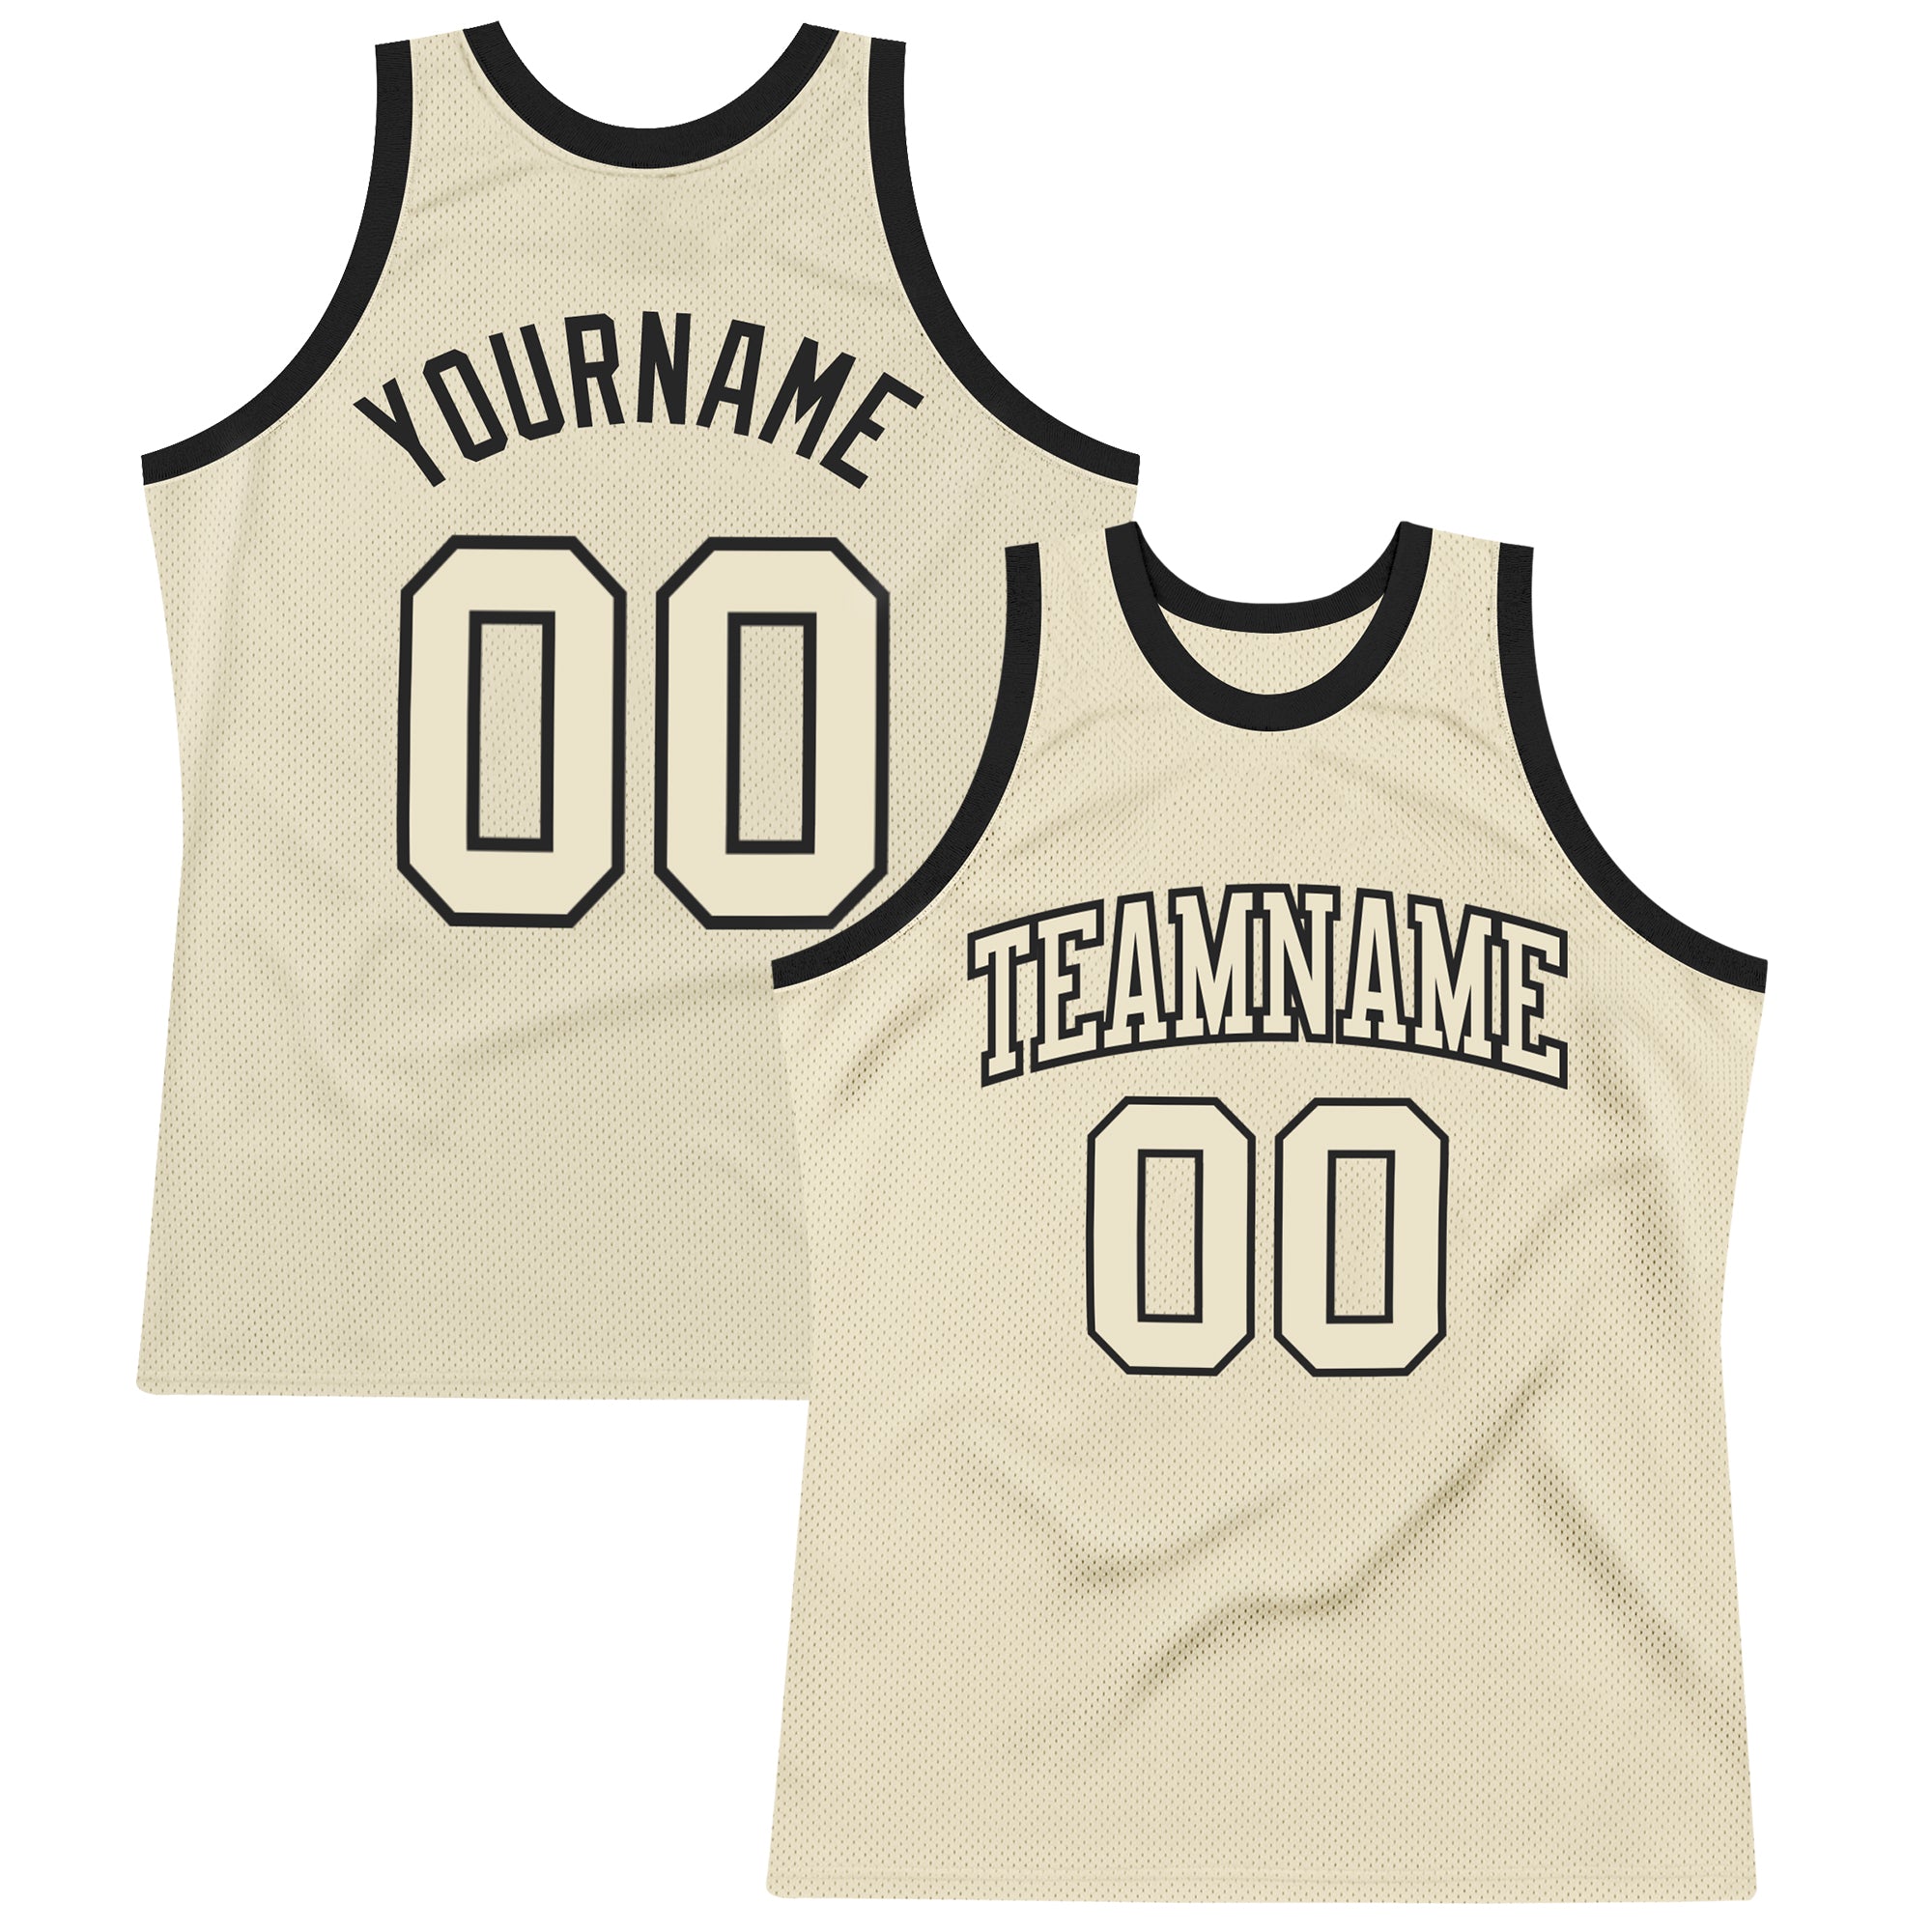 basketball jersey authentic